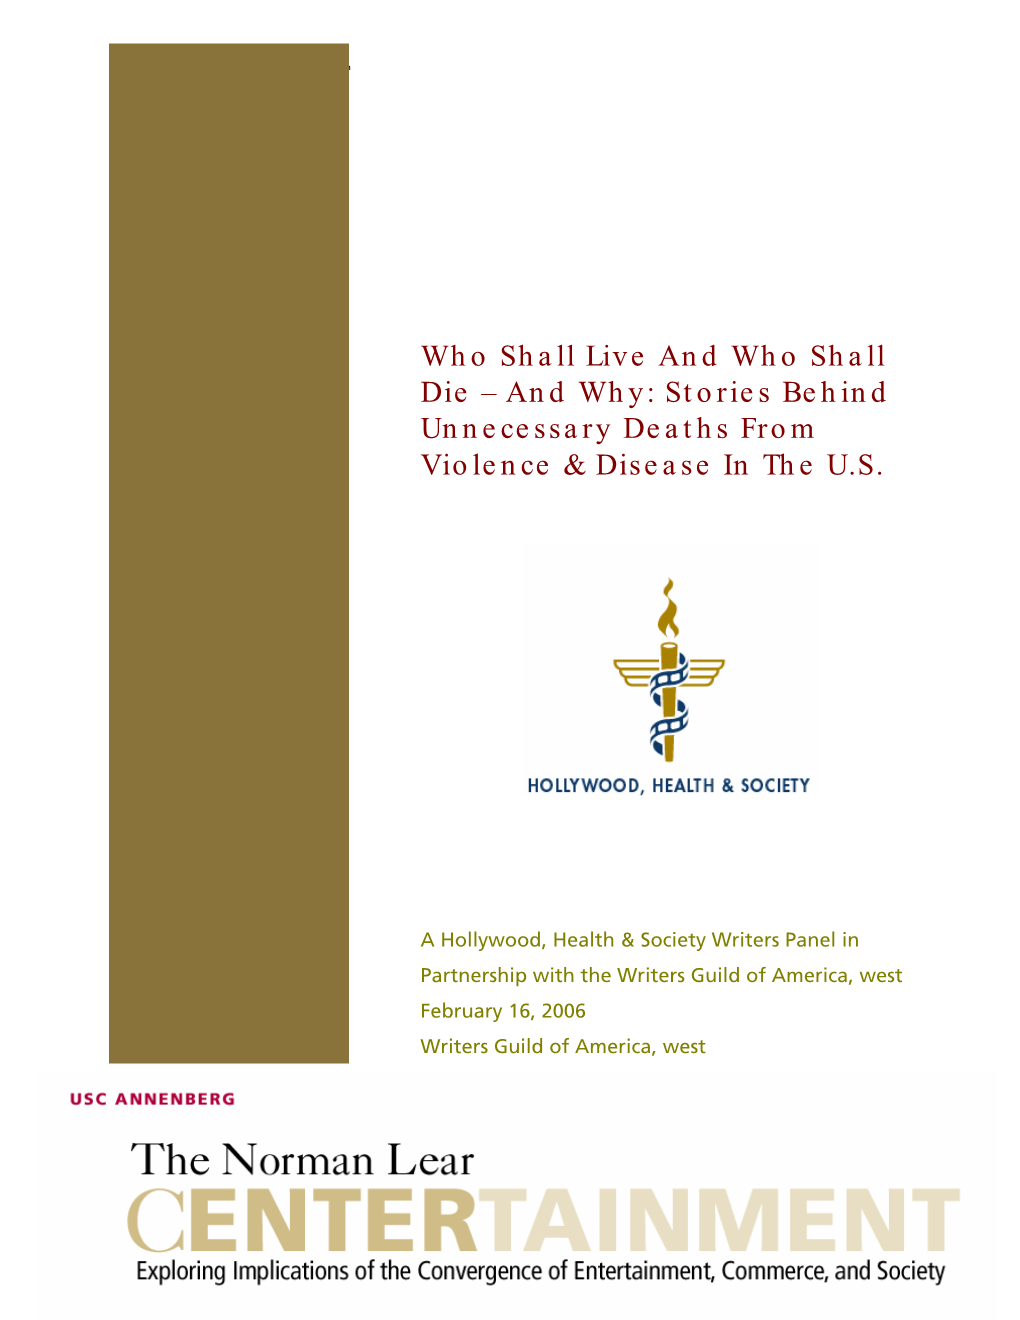 Who Shall Live and Who Shall Die – and Why: Stories Behind Unnecessary Deaths from Violence & Disease in the U.S